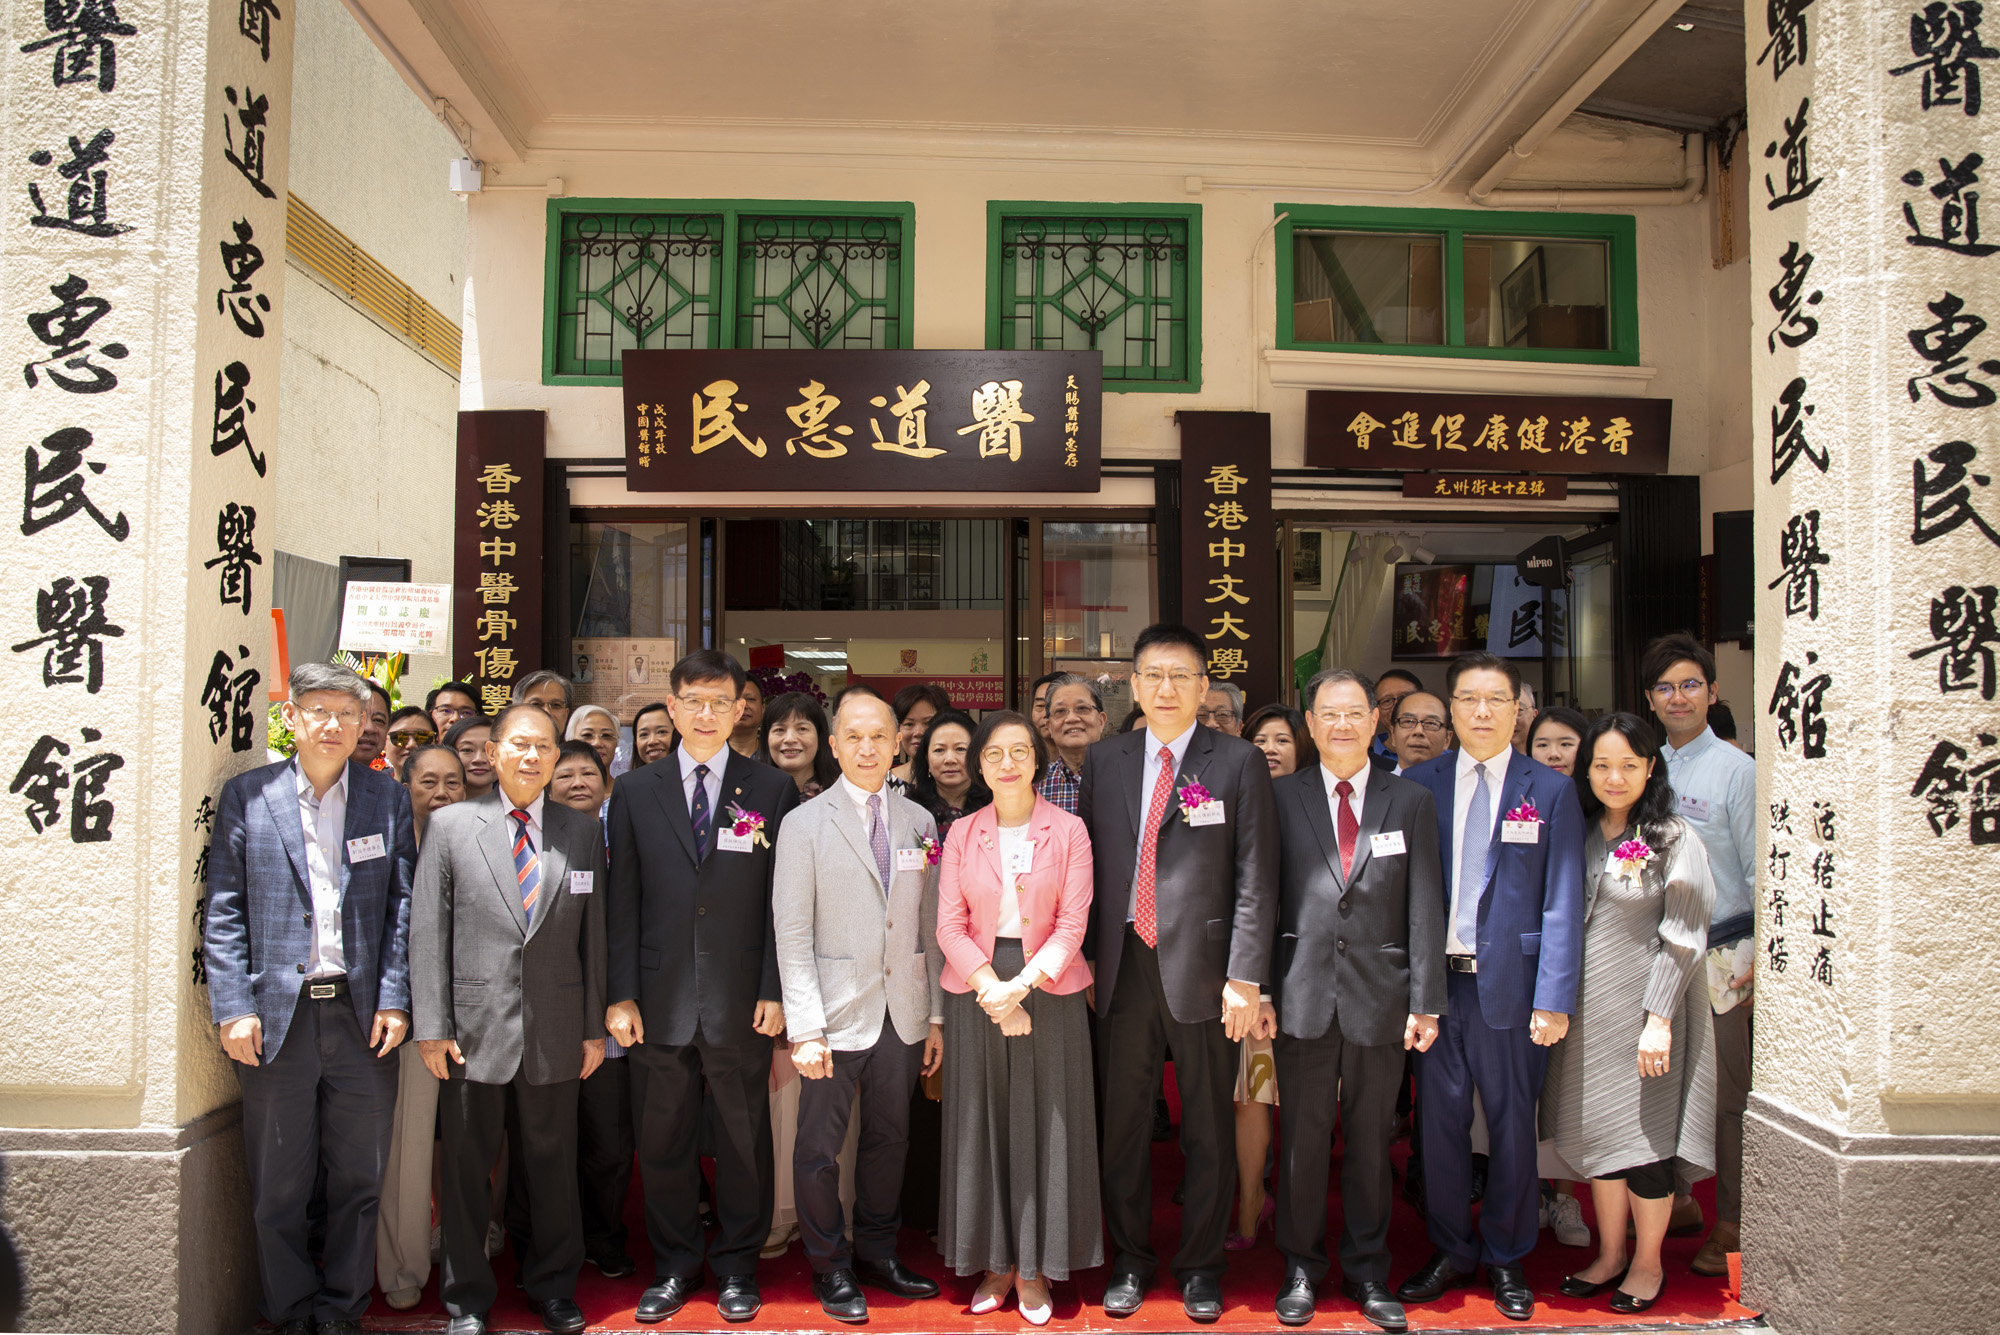 The School of Chinese Medicine at CUHK is collaborating with the Community Med Care and the Hong Kong T.C.M. Orthopaedic & Traumatic Association, to offer clinical practicum and training for Chinese Medicine students at the Community Med Care Clinic.